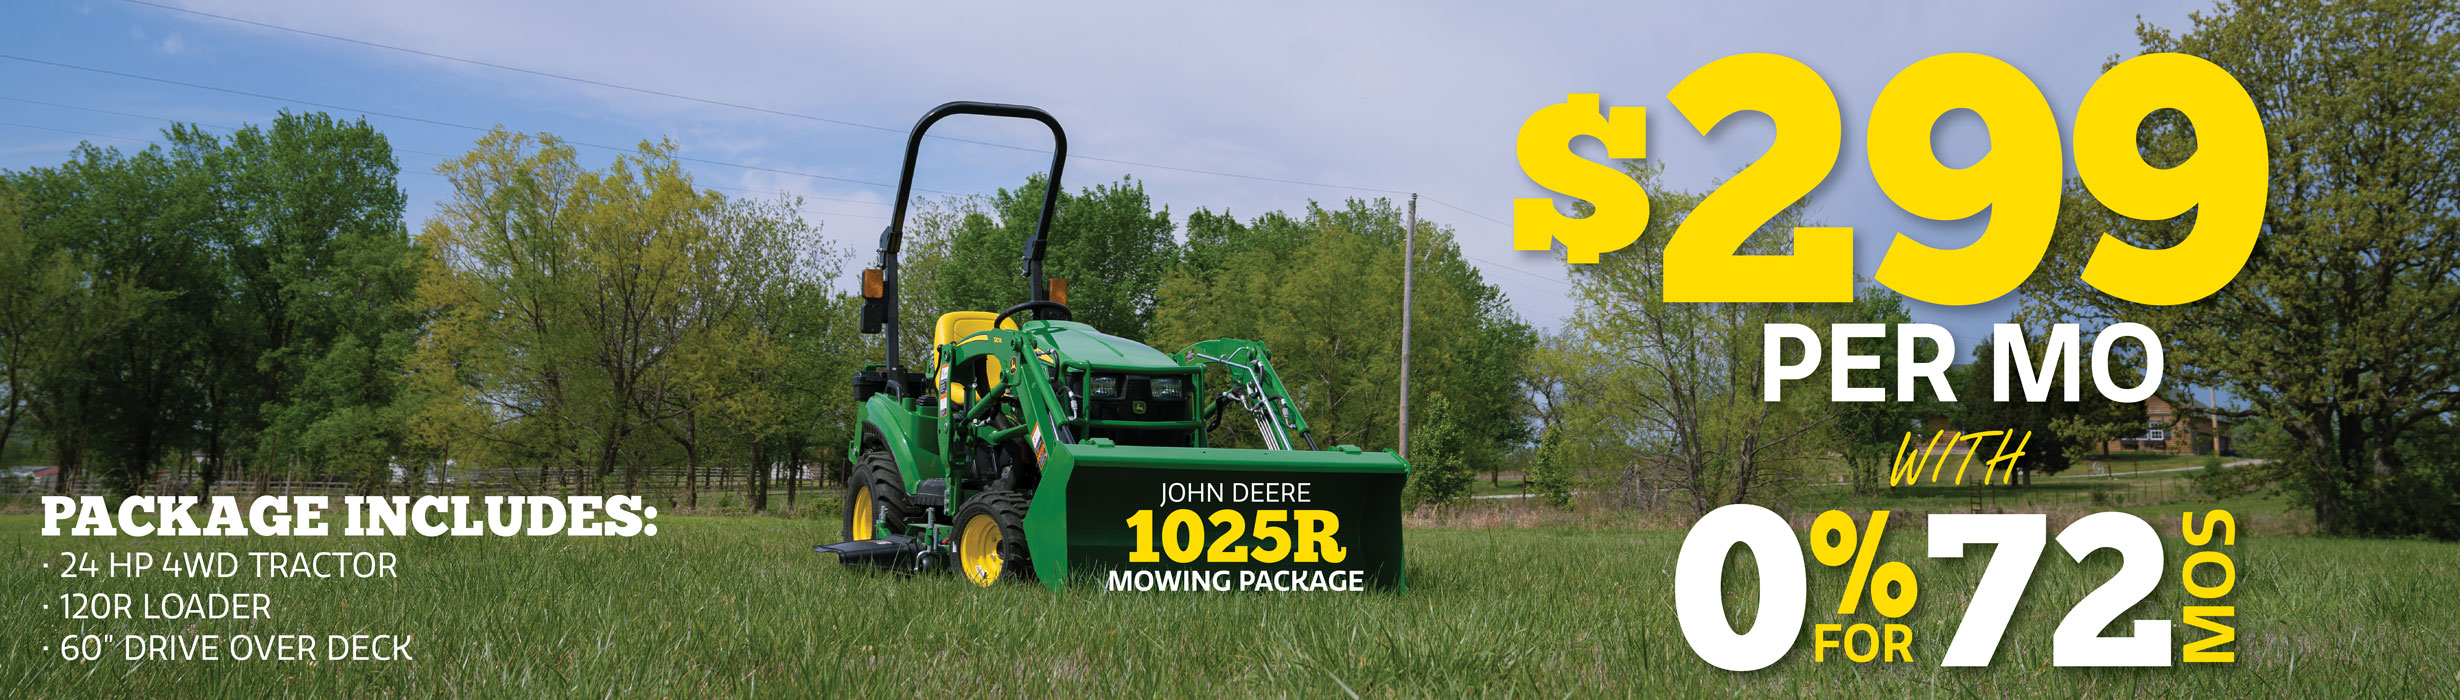 Get the 1025R Mowing PKG for just $299/mo with 0% for 72 months!